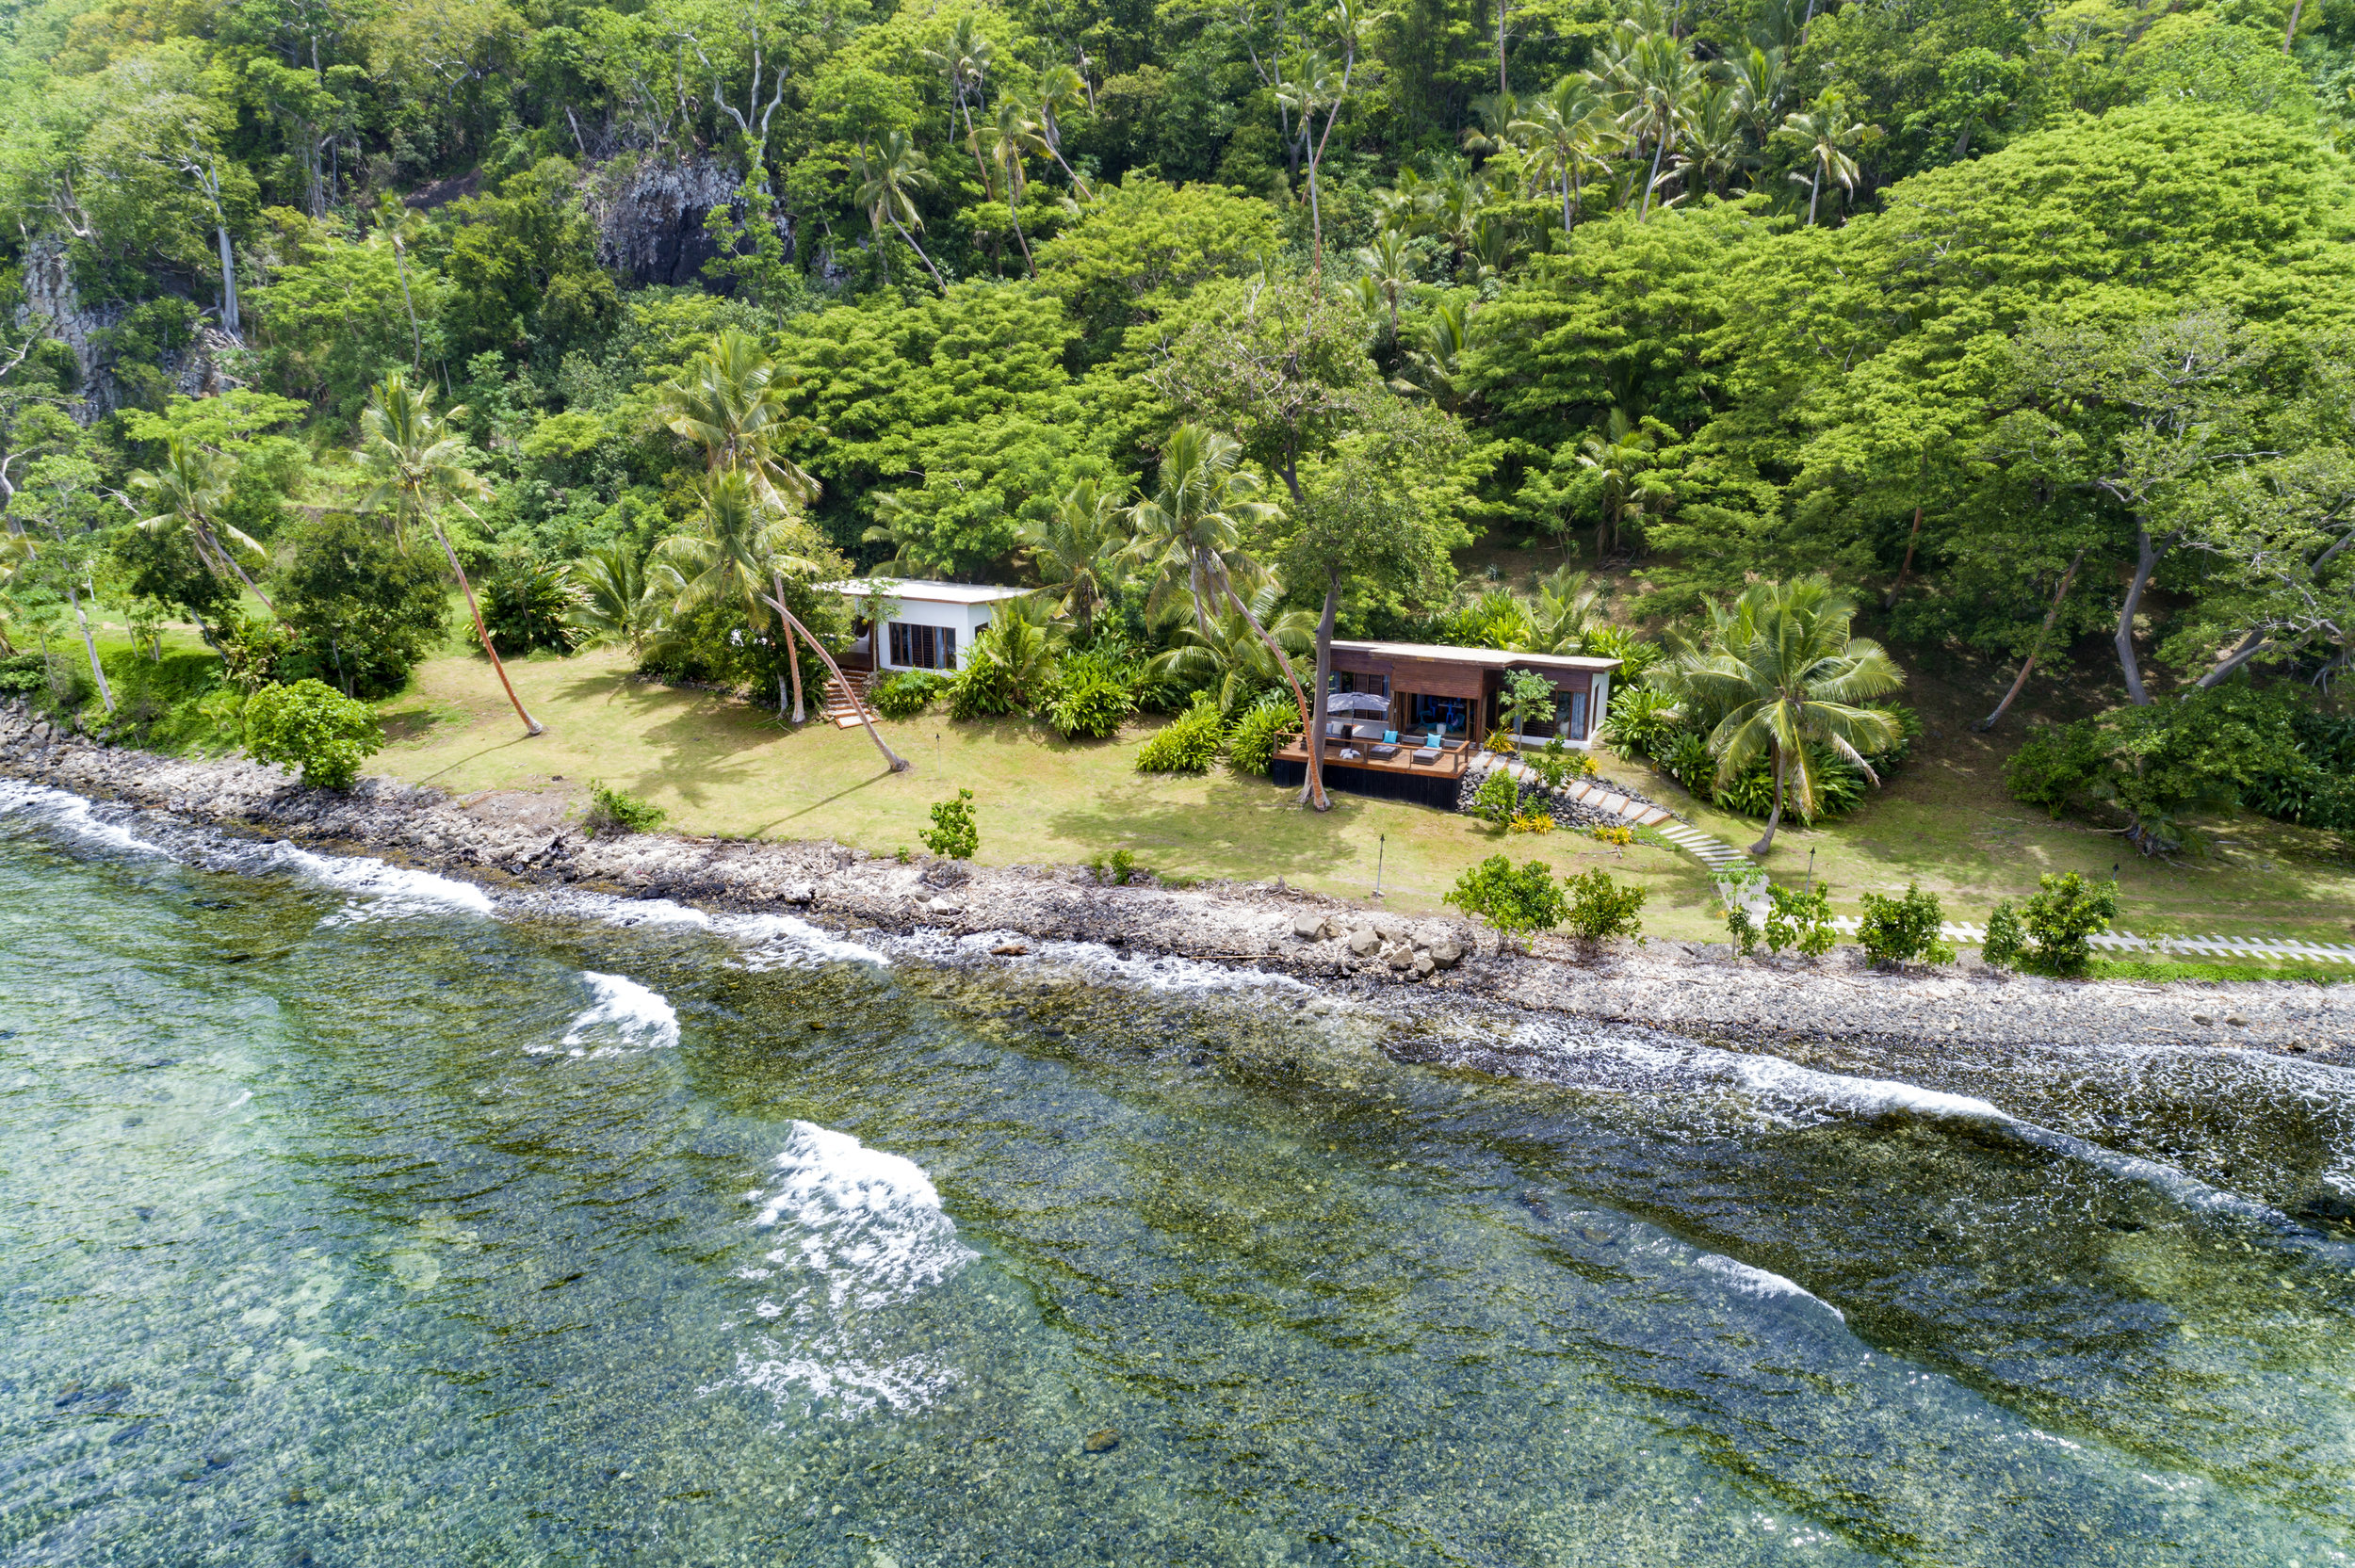 Two-bedroom Family Accommodation - up to four persons, The Remote Resort Fiji Islands